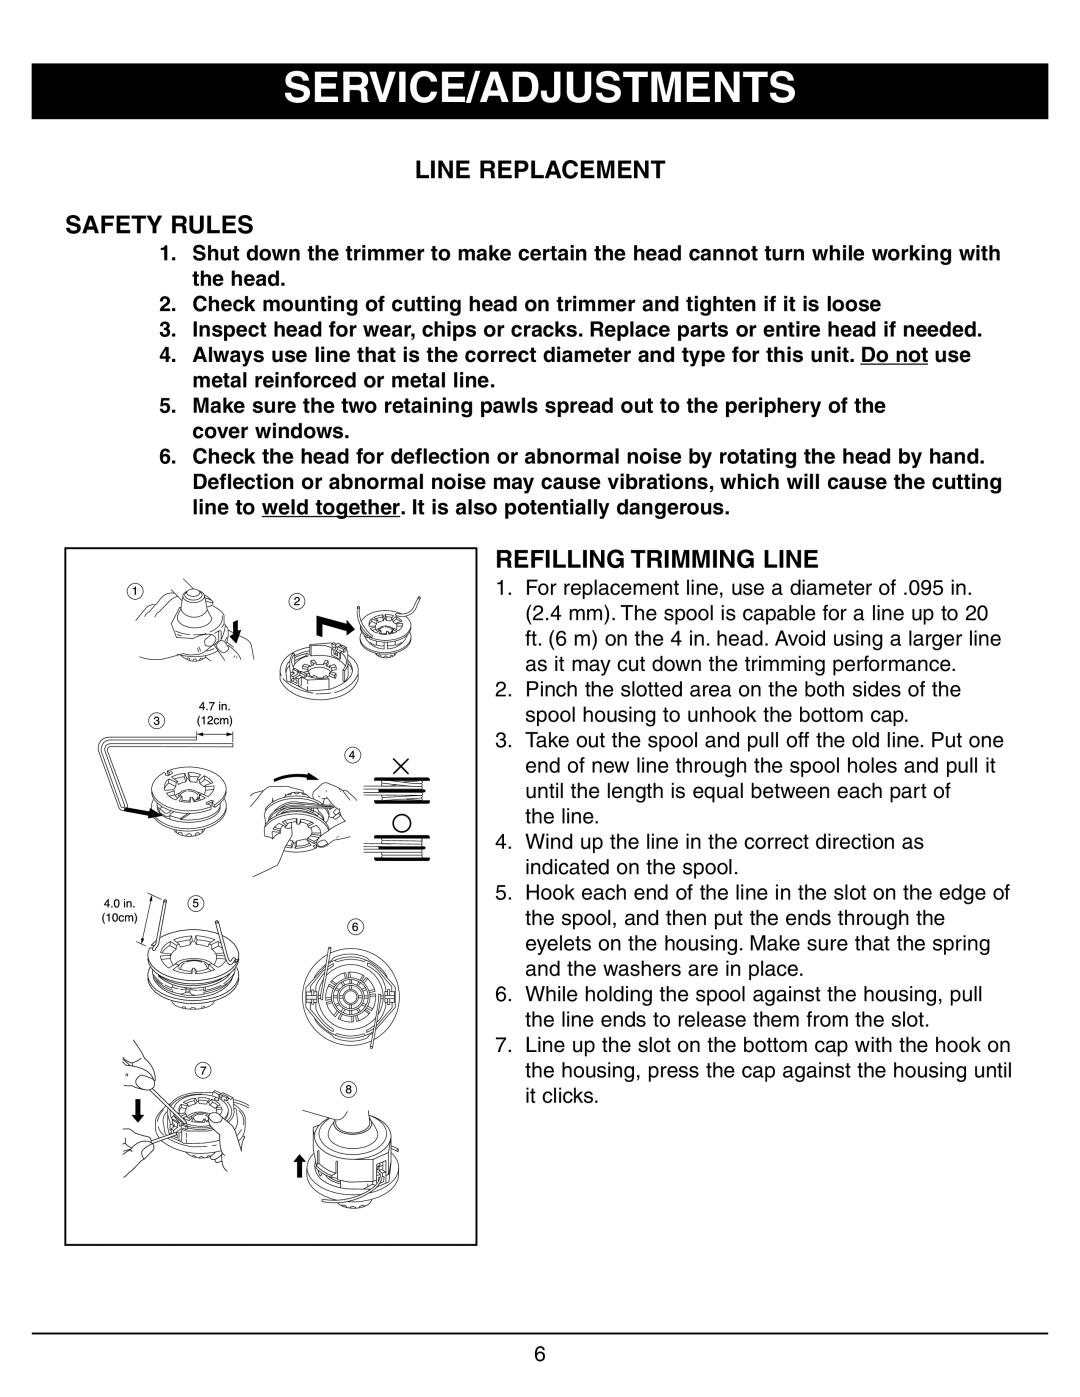 Sarlo SS-18 owner manual Service/Adjustments, Line Replacement Safety Rules, Refilling Trimming Line 